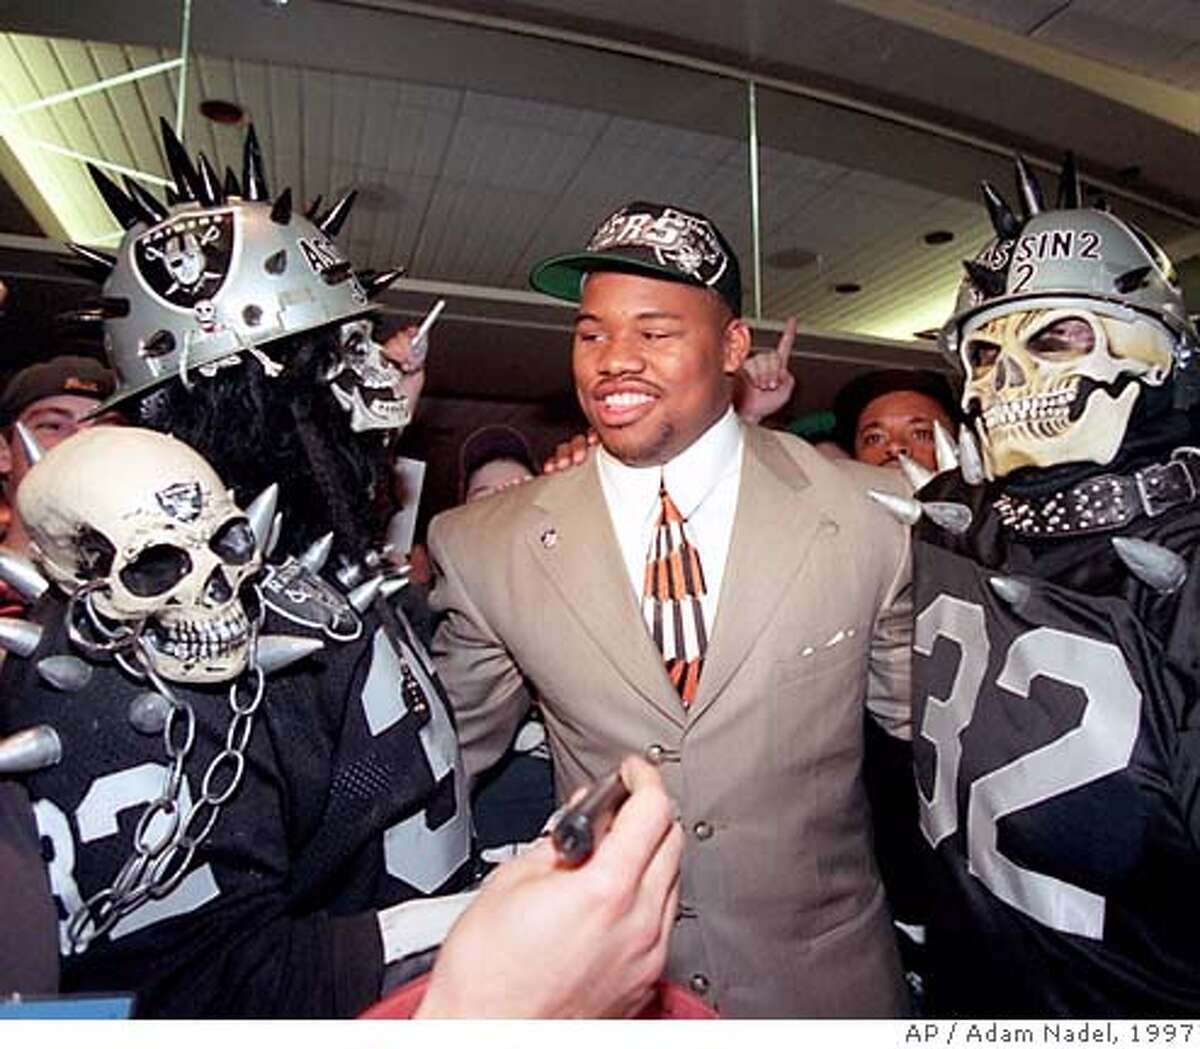 Darrell Russell, defensive tackle from Southern California, center, is surrounded by Oakland Raiders fans after being picked by the Raiders as their first-round pick in the NFL draft in New York, Saturday, April 19, 1997. (AP Photo/Adam Nadel) ALSO RAN 10/28/2003